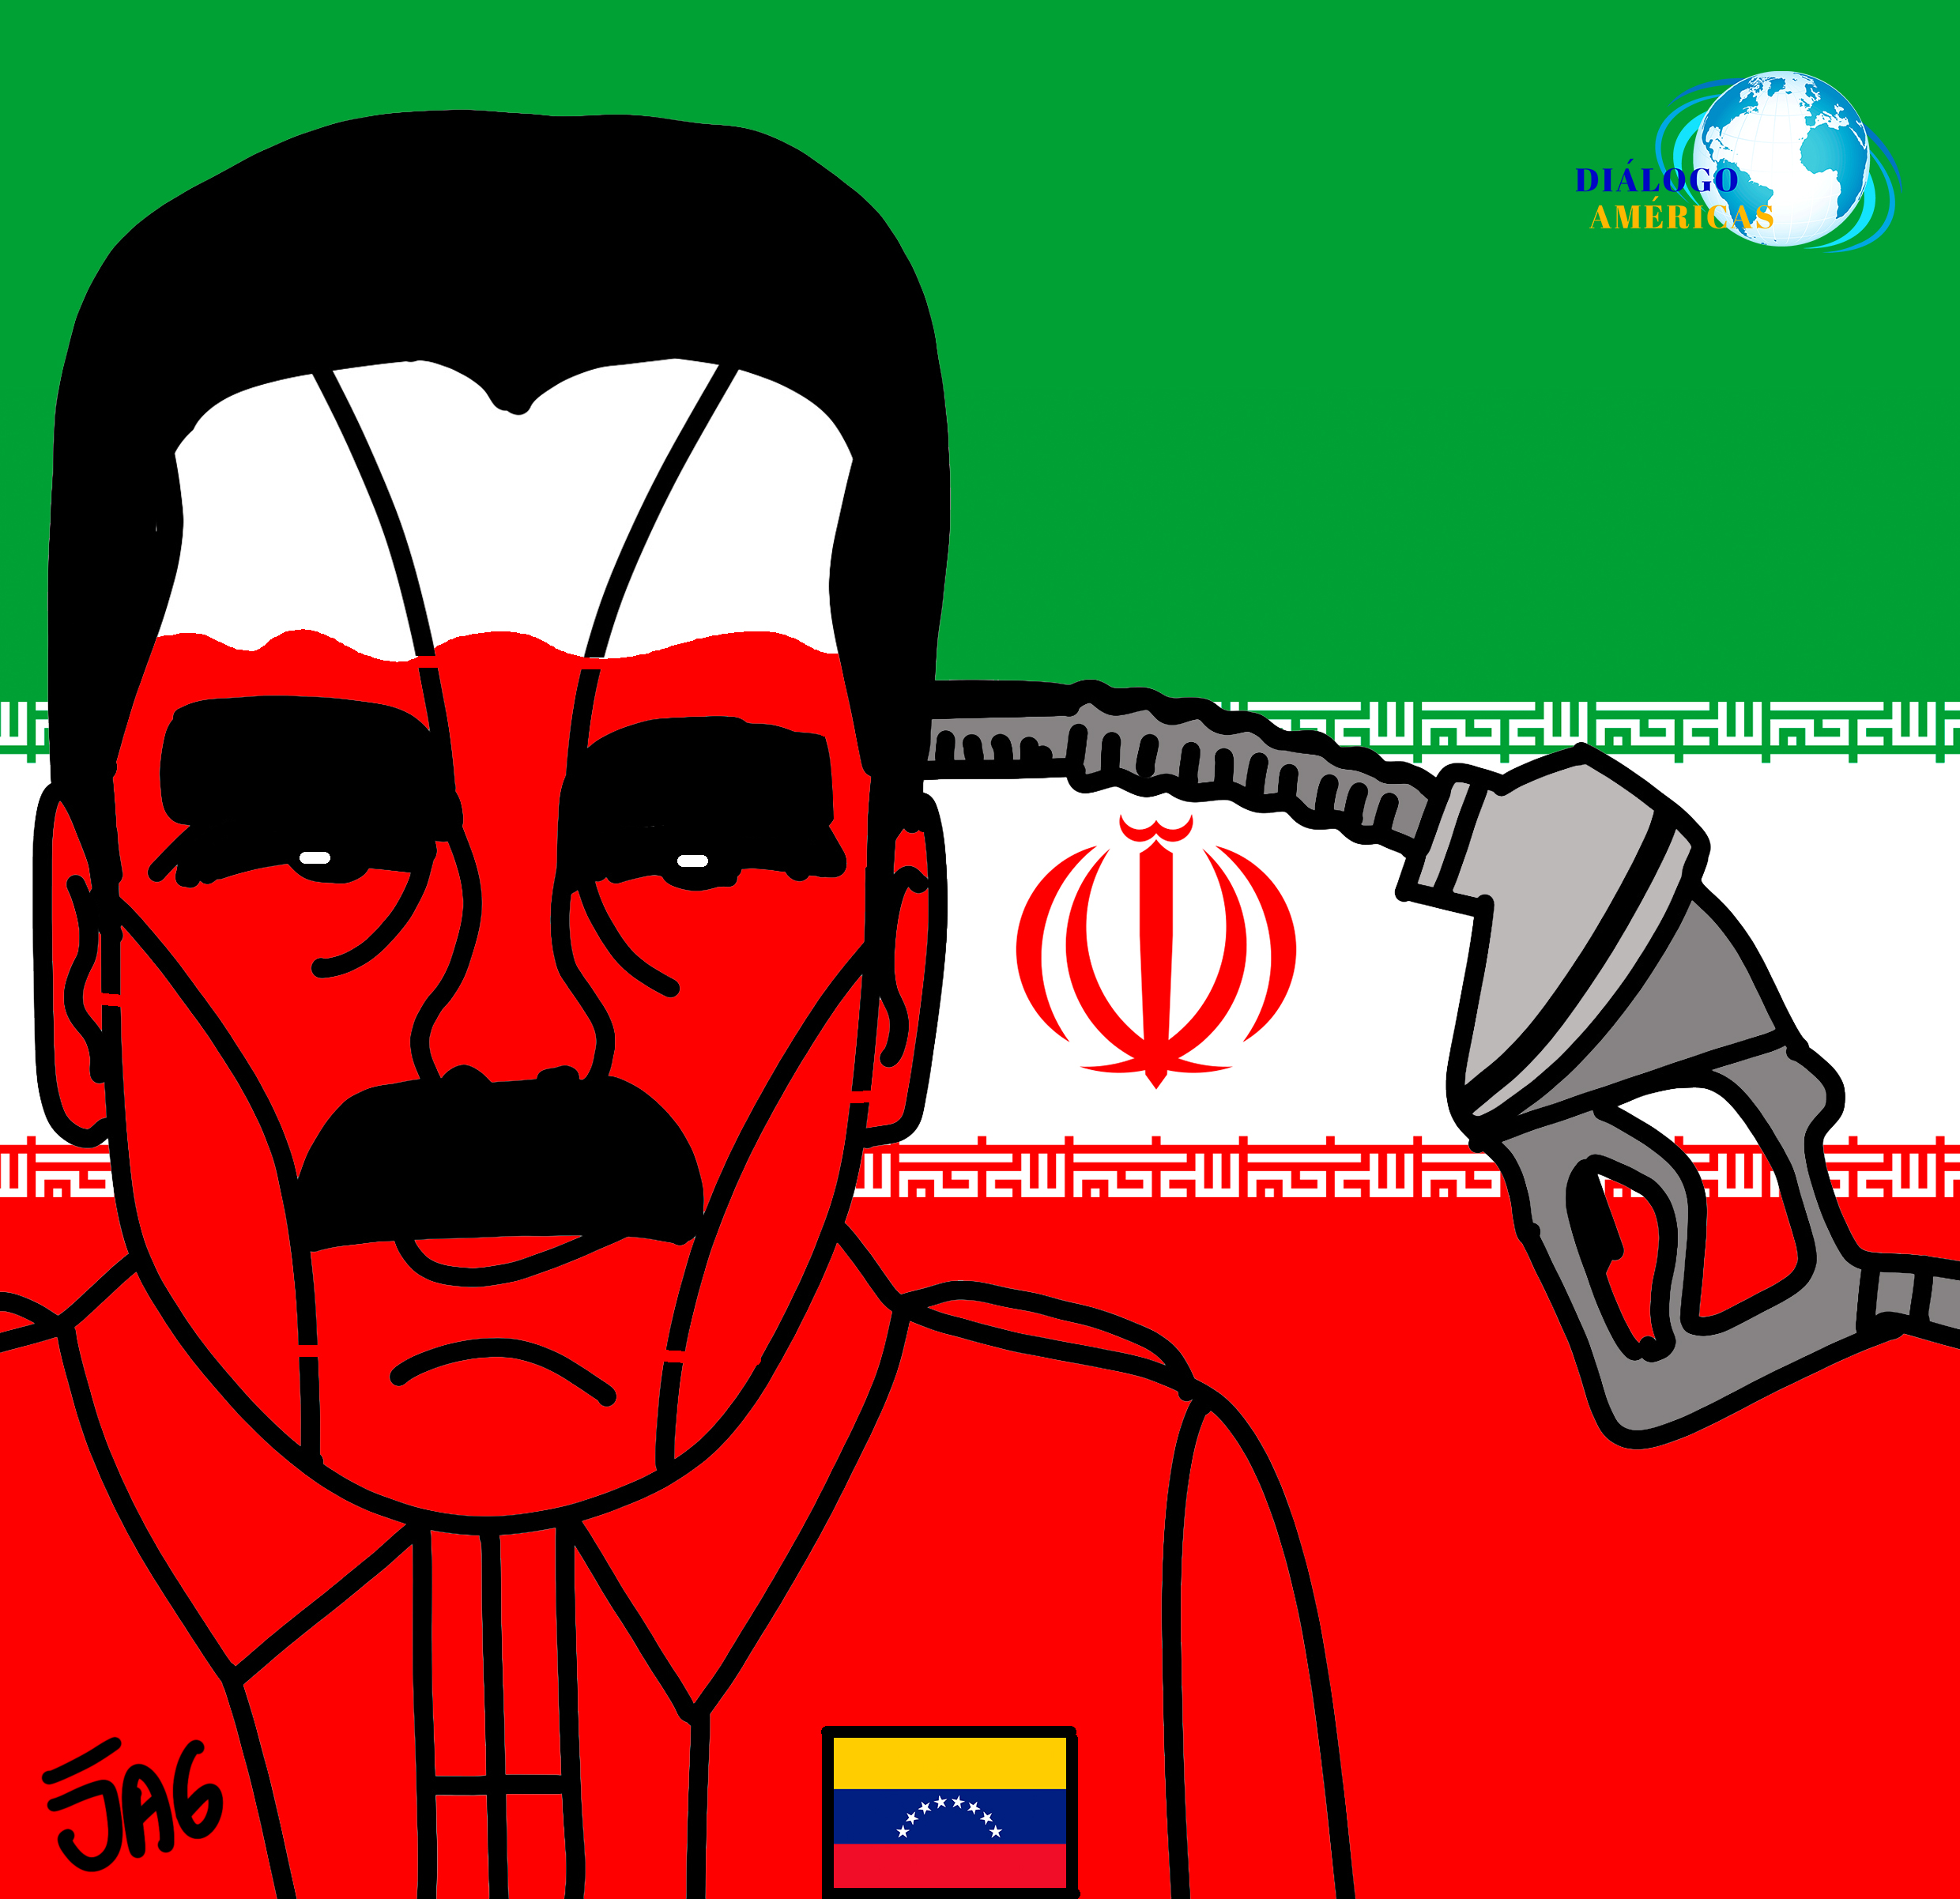 Pumping Up Maduro’s Oil Industry the Iranian Way